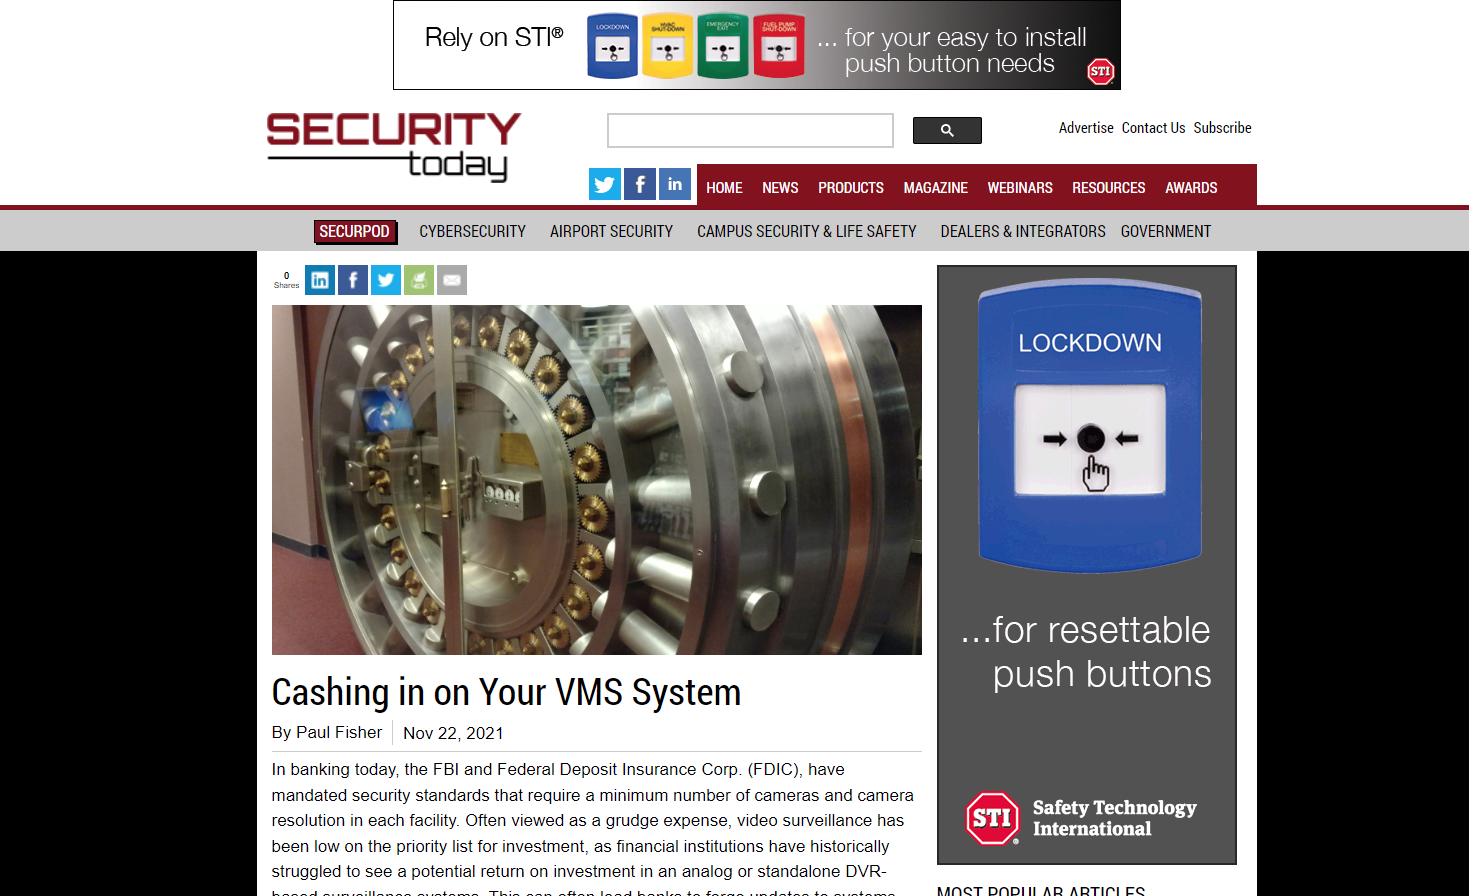 Cashing in on Your VMS System